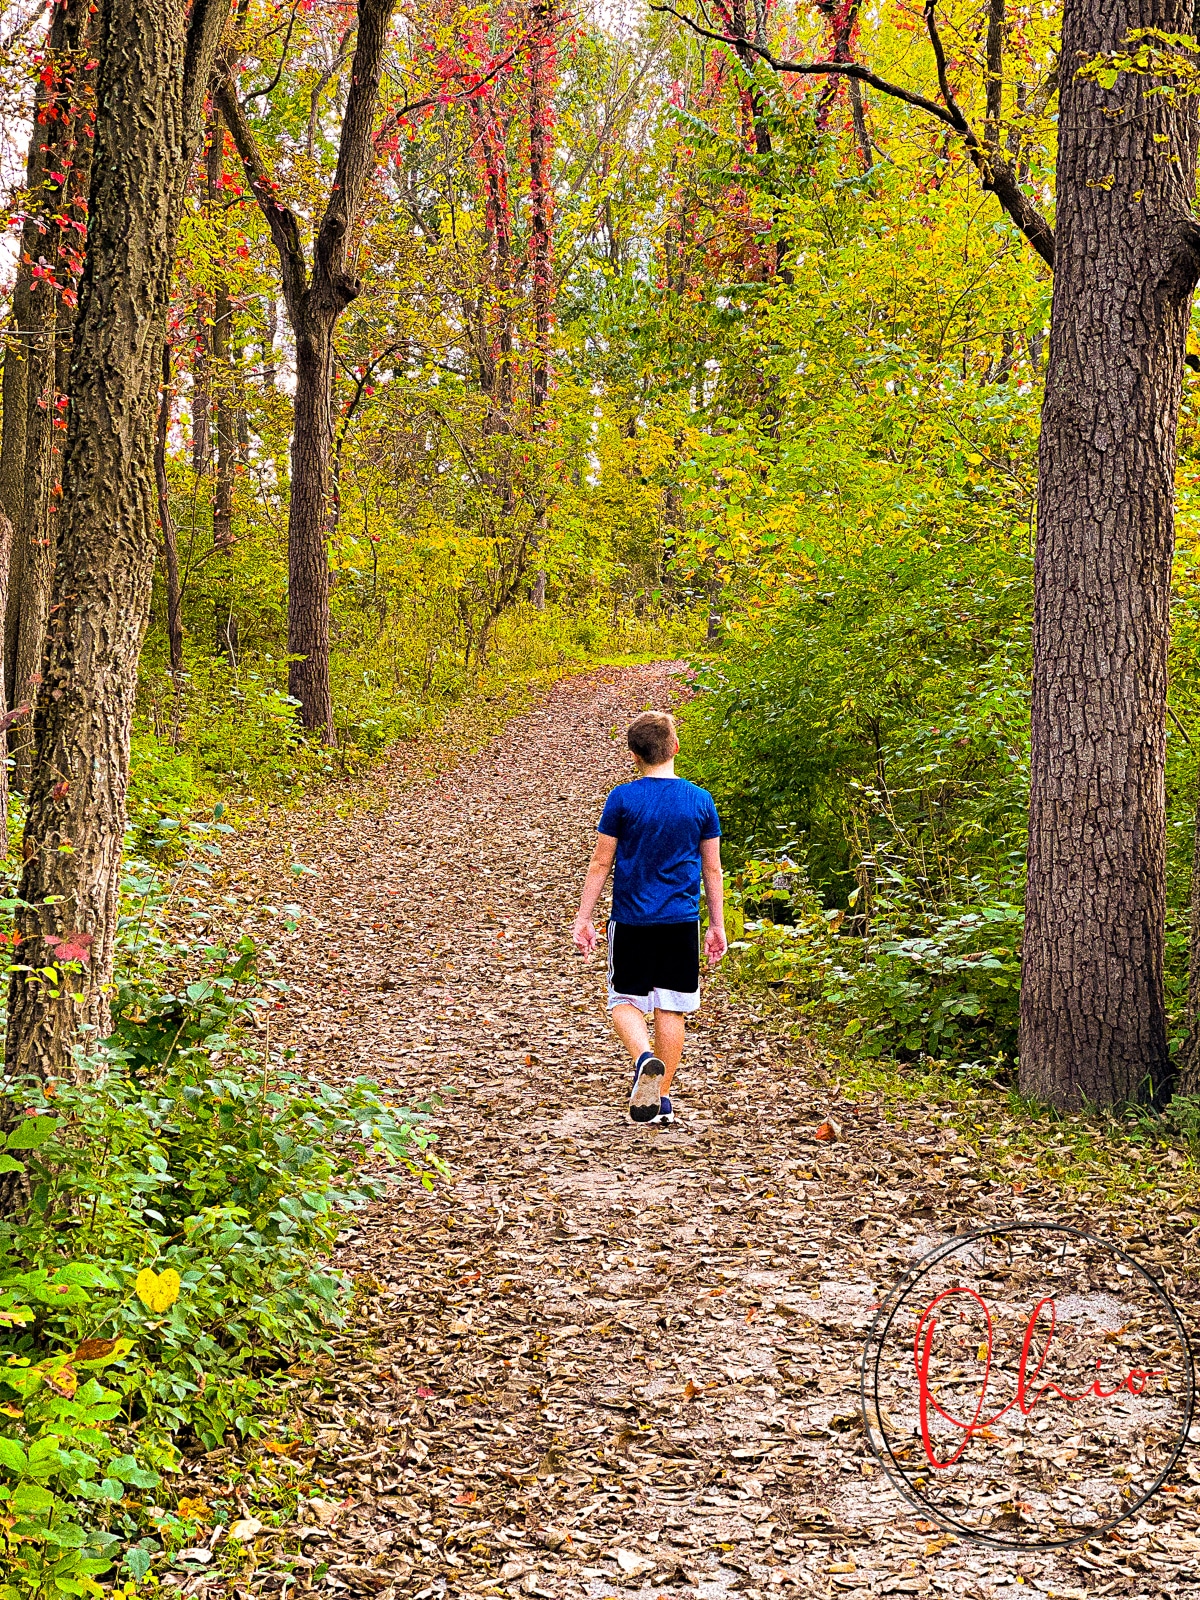 dirt path covered with dead fallen leaves, wooden tree leaves starting to change color and brown tree trunks. Boy with blue shirt and black shorts walking away from camera